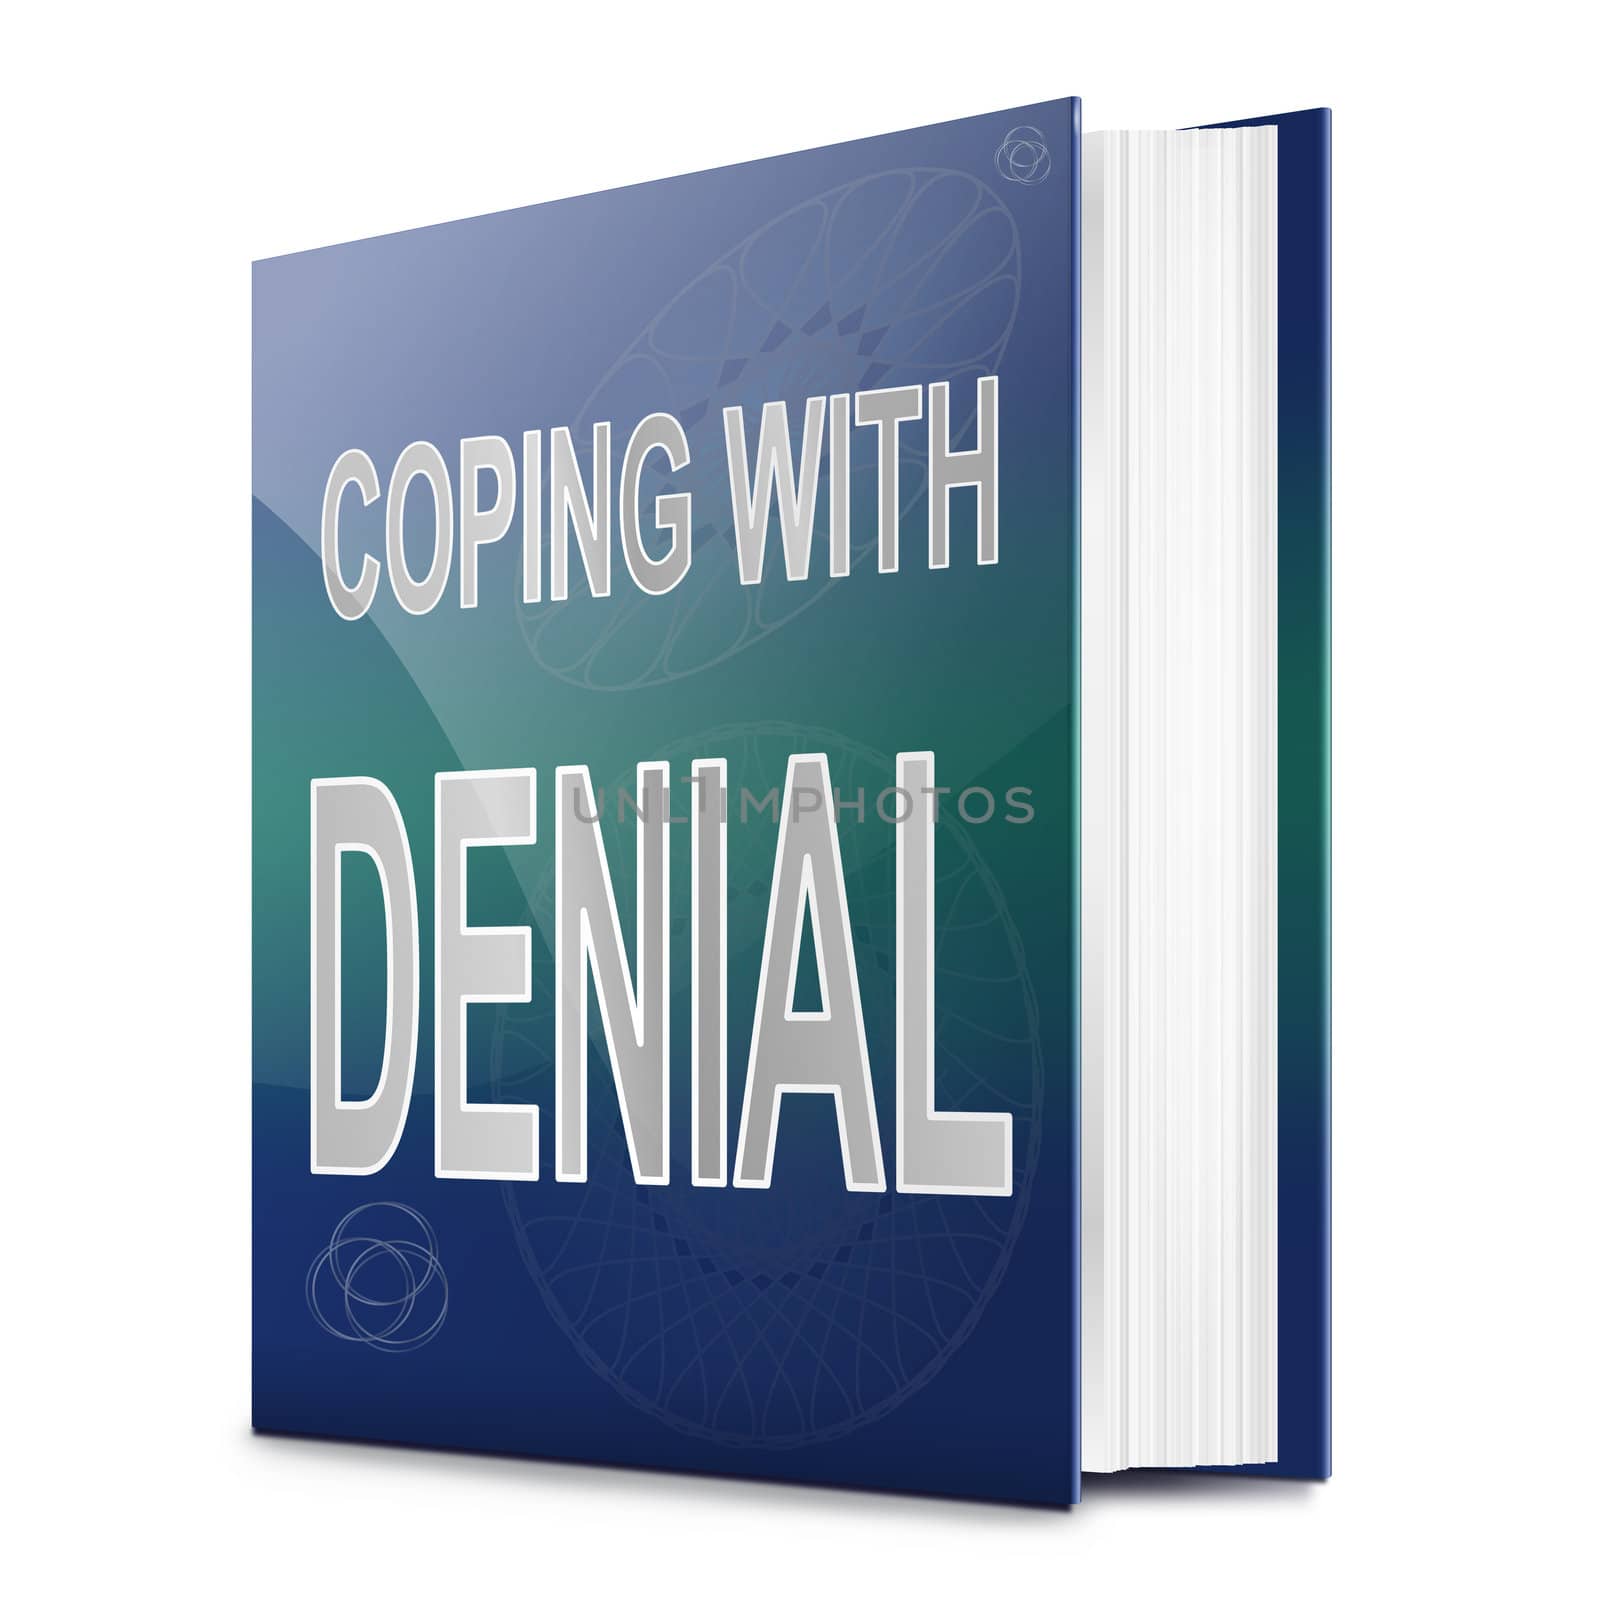 Illustration depicting a text book with a denial concept title. White background.